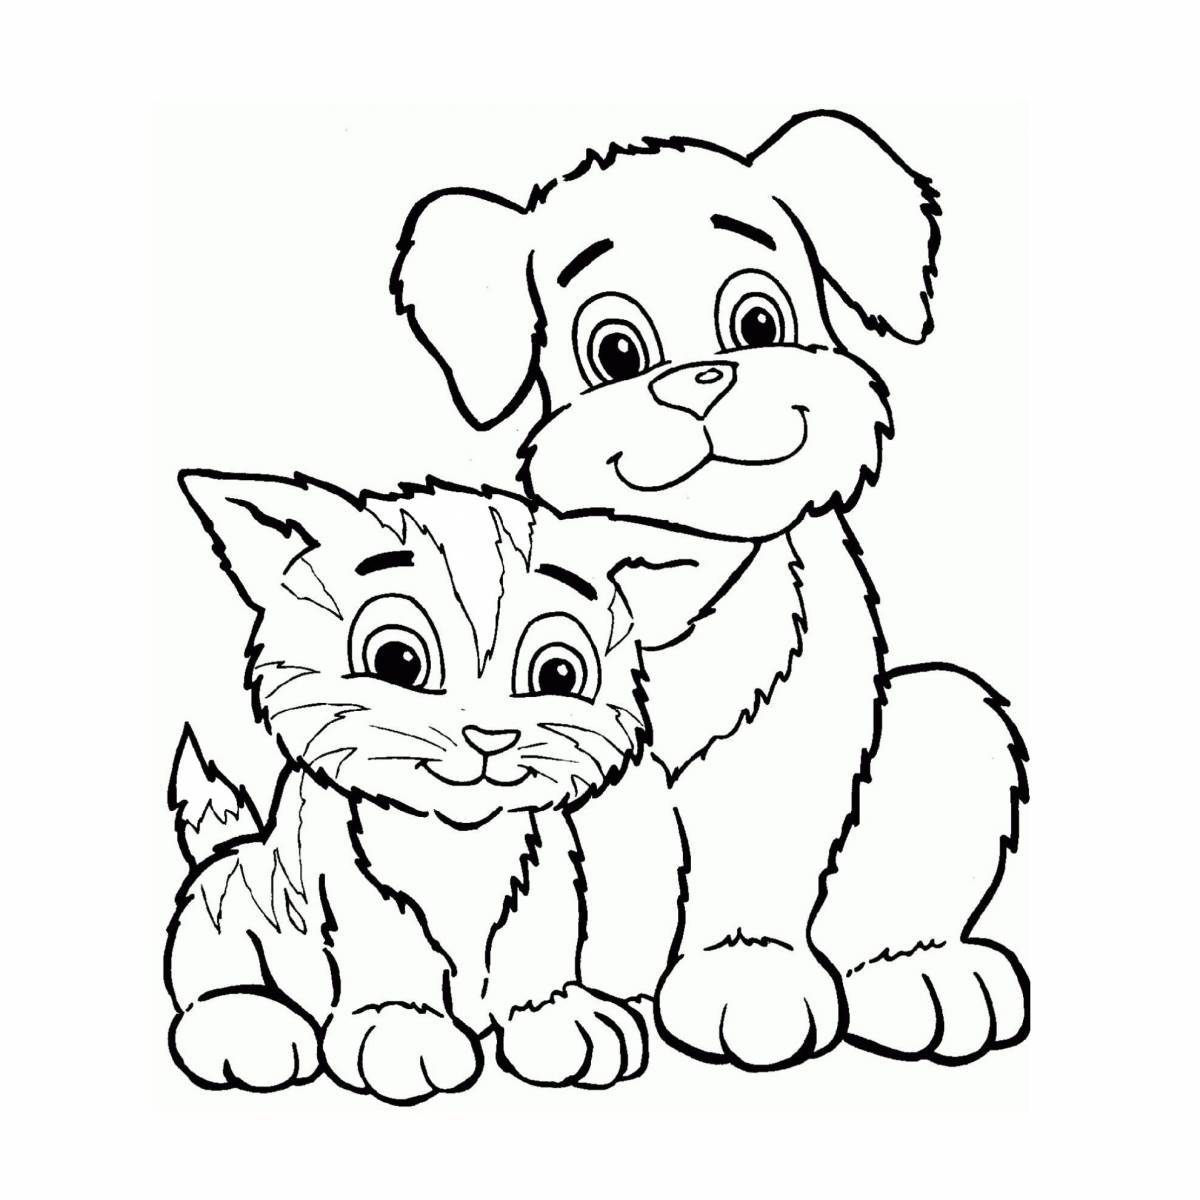 Impressive dog coloring book for kids 6-7 years old